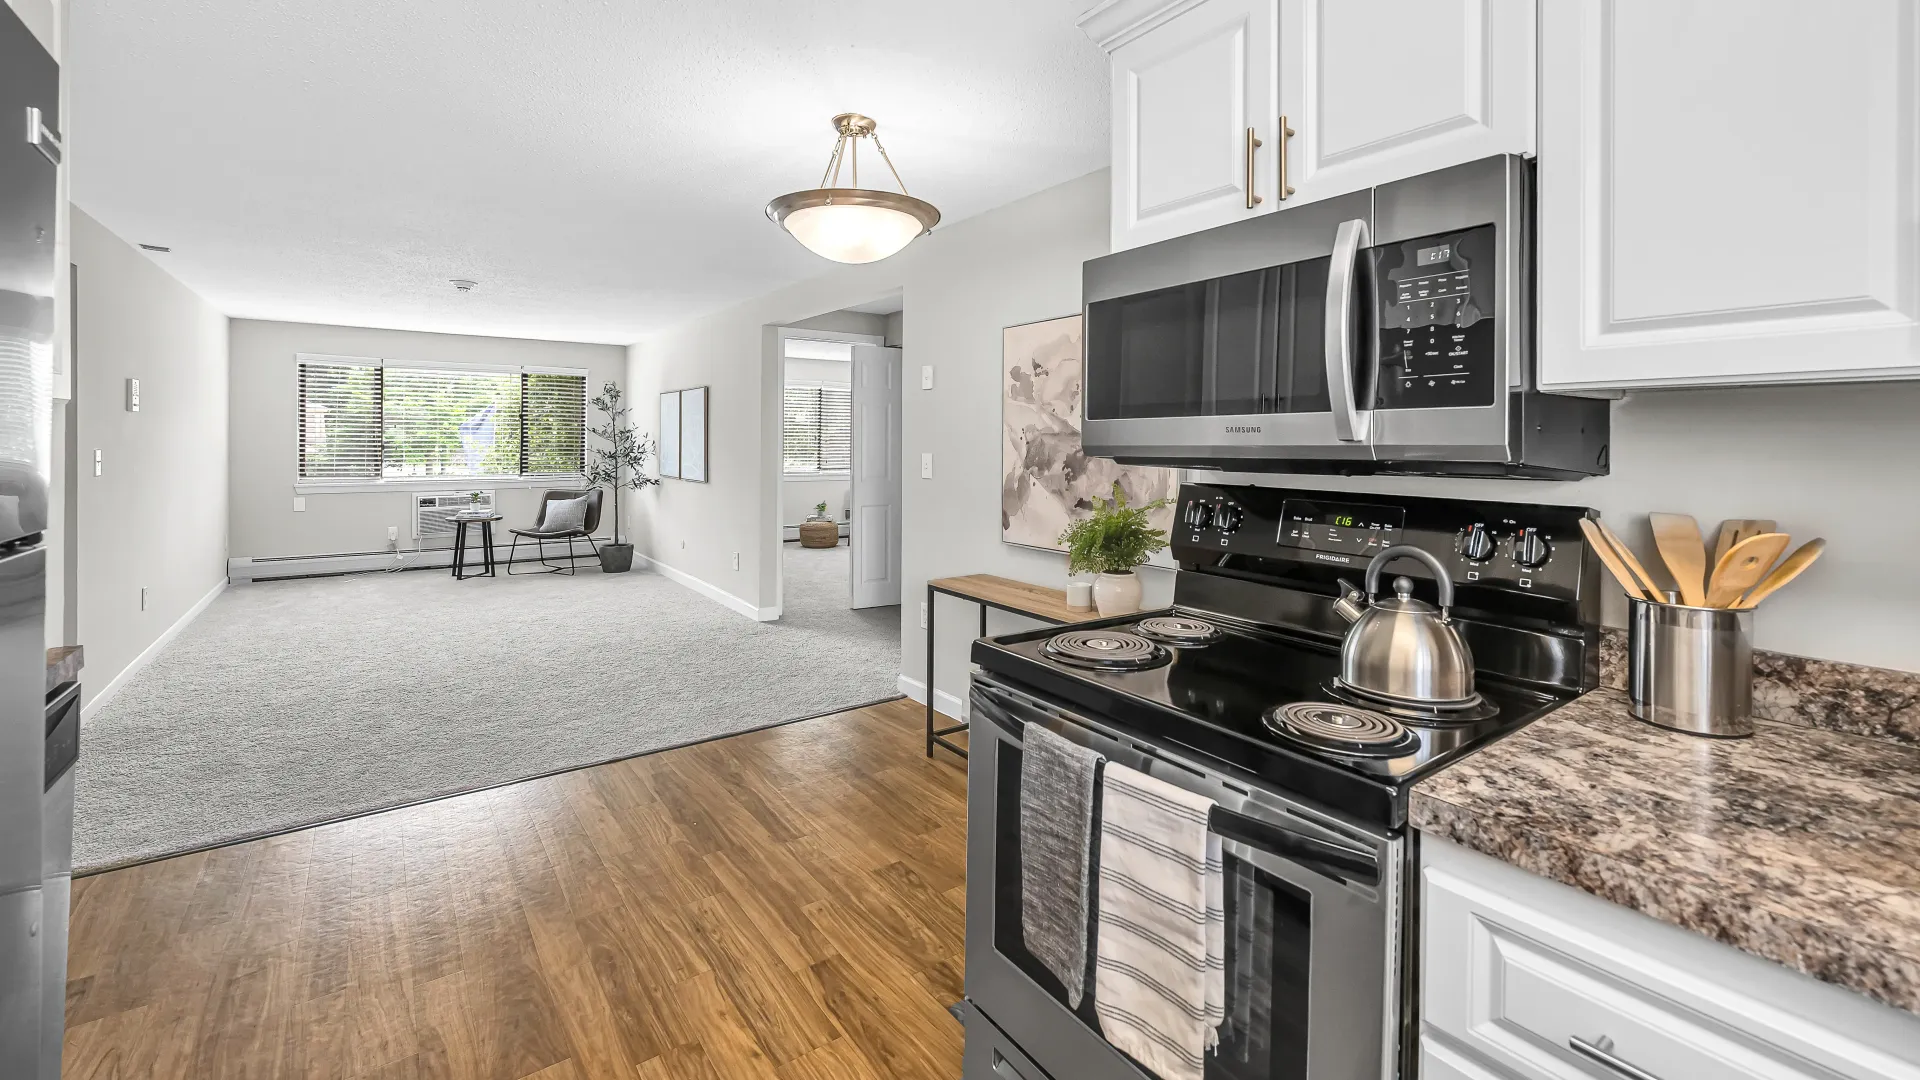 A sleek and stylish kitchen with a full set of stainless-steel appliances, offering a spacious countertop and a separate dining area.